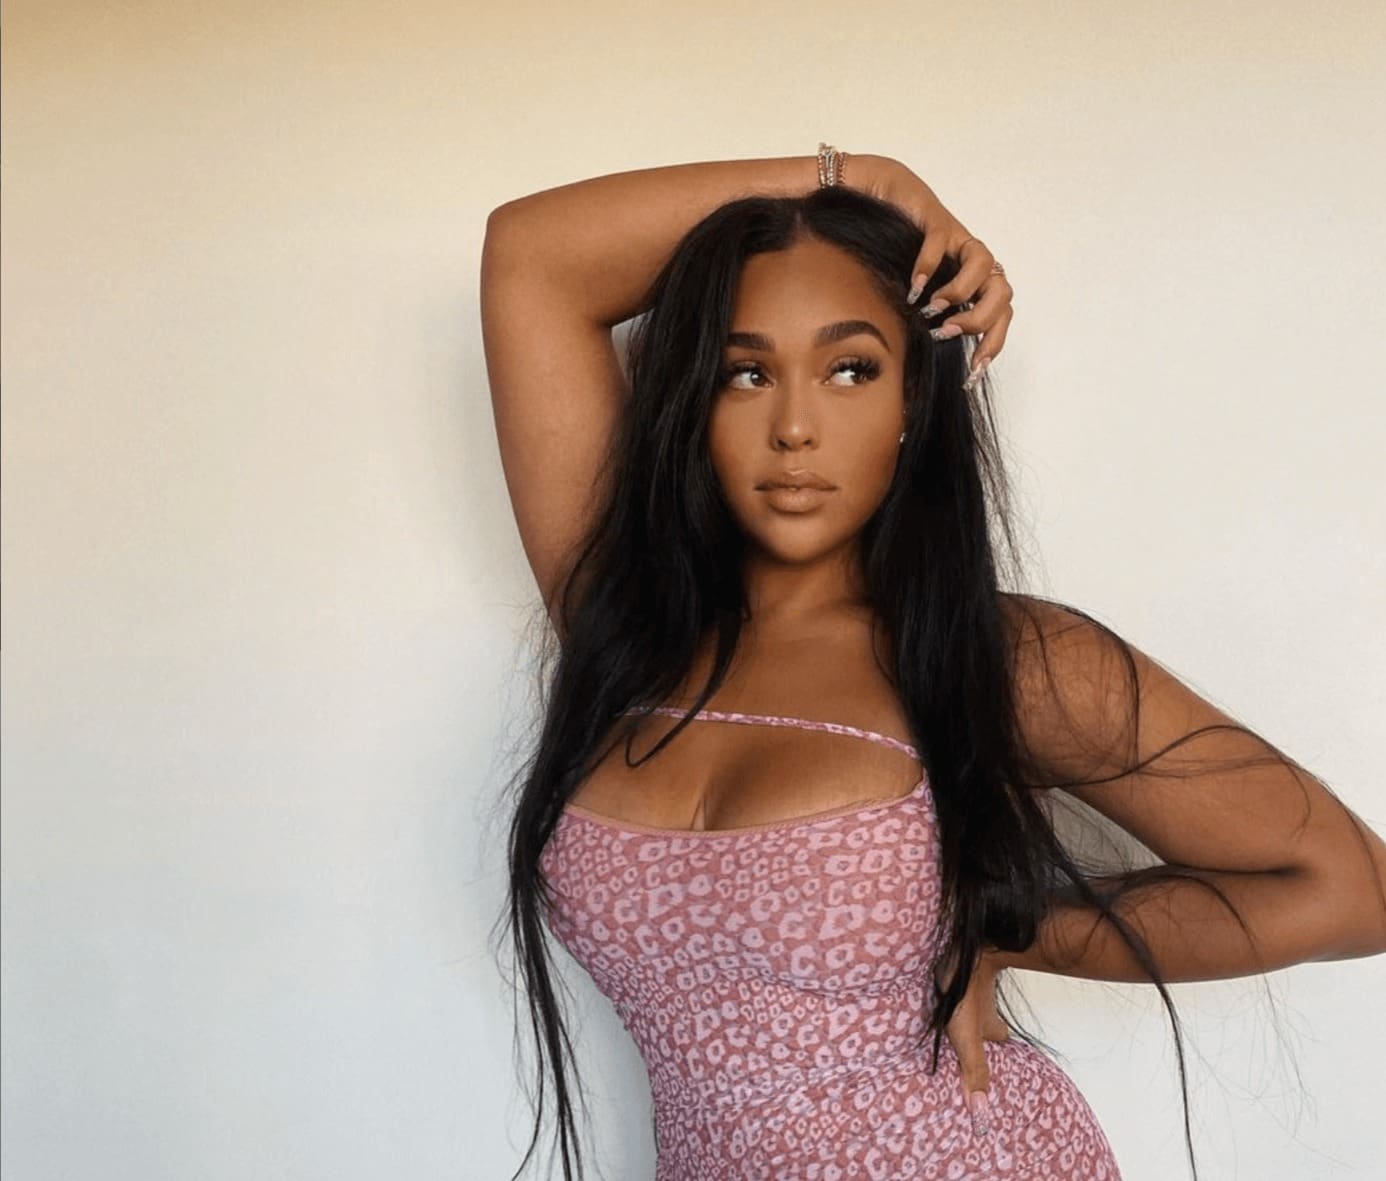 Jordyn Woods' Latest Clip And Pics Have Fans Saying She Should Have Been On WAP